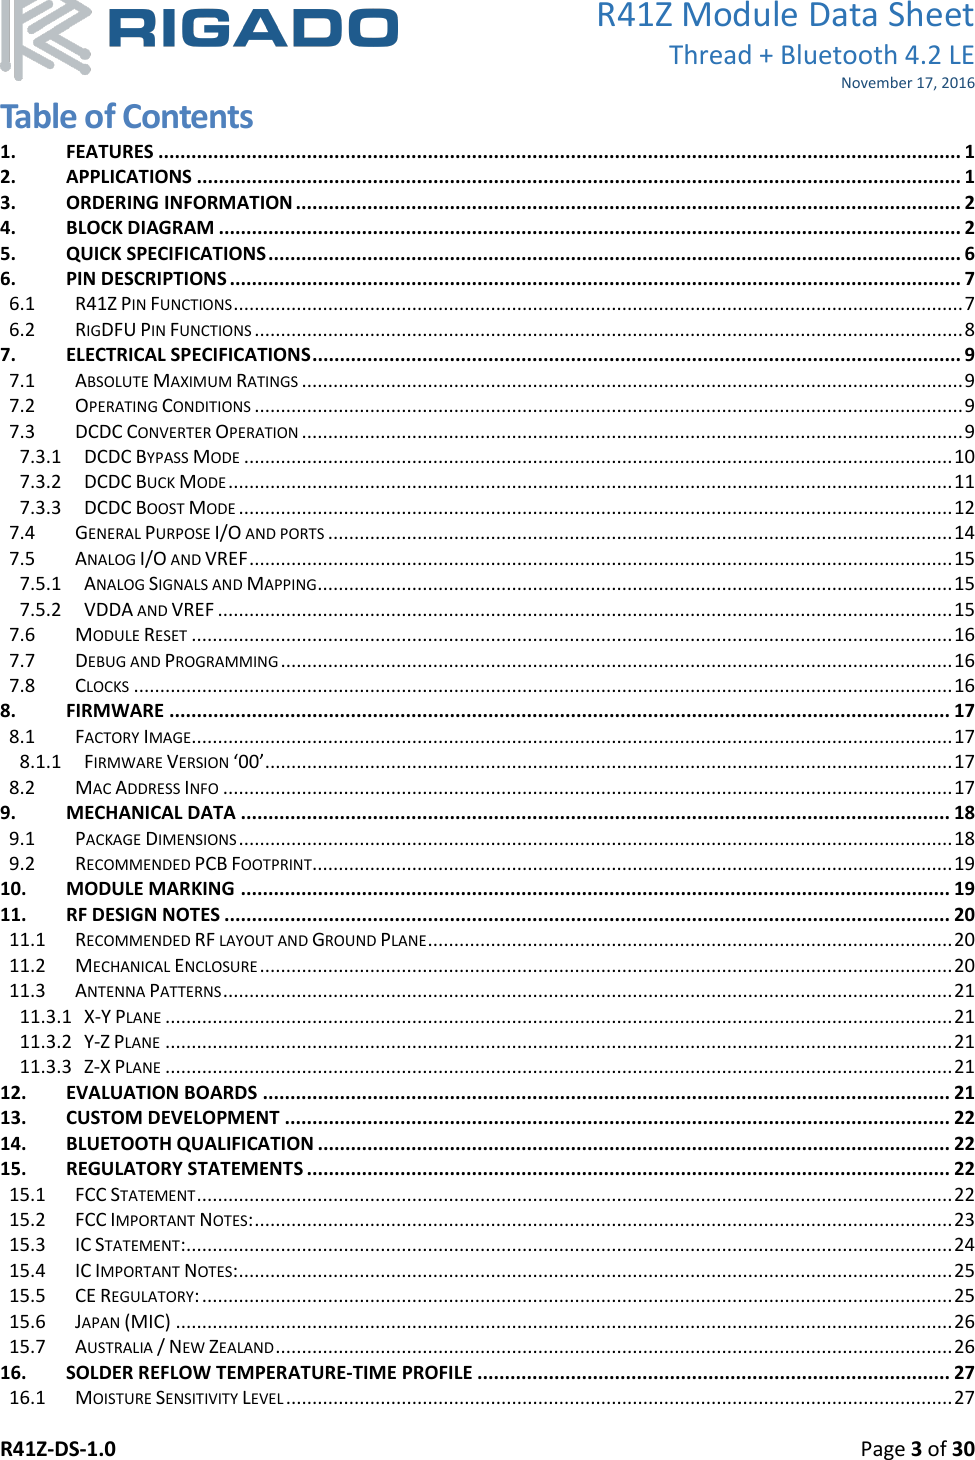 R41Z Module Data Sheet Thread + Bluetooth 4.2 LE November 17, 2016 R41Z-DS-1.0    Page 3 of 30  Table of Contents 1. FEATURES .................................................................................................................................................. 1 2. APPLICATIONS ........................................................................................................................................... 1 3. ORDERING INFORMATION ......................................................................................................................... 2 4. BLOCK DIAGRAM ....................................................................................................................................... 2 5. QUICK SPECIFICATIONS .............................................................................................................................. 6 6. PIN DESCRIPTIONS ..................................................................................................................................... 7 6.1  R41Z PIN FUNCTIONS ........................................................................................................................................... 7 6.2   RIGDFU PIN FUNCTIONS ....................................................................................................................................... 8 7. ELECTRICAL SPECIFICATIONS ...................................................................................................................... 9 7.1   ABSOLUTE MAXIMUM RATINGS .............................................................................................................................. 9 7.2   OPERATING CONDITIONS ....................................................................................................................................... 9 7.3   DCDC CONVERTER OPERATION .............................................................................................................................. 9 7.3.1   DCDC BYPASS MODE ....................................................................................................................................... 10 7.3.2   DCDC BUCK MODE .......................................................................................................................................... 11 7.3.3   DCDC BOOST MODE ........................................................................................................................................ 12 7.4   GENERAL PURPOSE I/O AND PORTS ....................................................................................................................... 14 7.5   ANALOG I/O AND VREF ...................................................................................................................................... 15 7.5.1   ANALOG SIGNALS AND MAPPING ......................................................................................................................... 15 7.5.2  VDDA AND VREF ............................................................................................................................................ 15 7.6   MODULE RESET ................................................................................................................................................. 16 7.7   DEBUG AND PROGRAMMING ................................................................................................................................ 16 7.8   CLOCKS ............................................................................................................................................................ 16 8. FIRMWARE .............................................................................................................................................. 17 8.1   FACTORY IMAGE ................................................................................................................................................. 17 8.1.1   FIRMWARE VERSION ‘00’ ................................................................................................................................... 17 8.2   MAC ADDRESS INFO ........................................................................................................................................... 17 9. MECHANICAL DATA ................................................................................................................................. 18 9.1   PACKAGE DIMENSIONS ........................................................................................................................................ 18 9.2   RECOMMENDED PCB FOOTPRINT .......................................................................................................................... 19 10. MODULE MARKING ................................................................................................................................. 19 11. RF DESIGN NOTES .................................................................................................................................... 20 11.1   RECOMMENDED RF LAYOUT AND GROUND PLANE .................................................................................................... 20 11.2   MECHANICAL ENCLOSURE .................................................................................................................................... 20 11.3   ANTENNA PATTERNS ........................................................................................................................................... 21 11.3.1   X-Y PLANE ...................................................................................................................................................... 21 11.3.2   Y-Z PLANE ...................................................................................................................................................... 21 11.3.3   Z-X PLANE ...................................................................................................................................................... 21 12. EVALUATION BOARDS ............................................................................................................................. 21 13. CUSTOM DEVELOPMENT ......................................................................................................................... 22 14. BLUETOOTH QUALIFICATION ................................................................................................................... 22 15. REGULATORY STATEMENTS ..................................................................................................................... 22 15.1   FCC STATEMENT ................................................................................................................................................ 22 15.2   FCC IMPORTANT NOTES: ..................................................................................................................................... 23 15.3  IC STATEMENT: .................................................................................................................................................. 24 15.4  IC IMPORTANT NOTES: ........................................................................................................................................ 25 15.5  CE REGULATORY: ............................................................................................................................................... 25 15.6   JAPAN (MIC) .................................................................................................................................................... 26 15.7   AUSTRALIA / NEW ZEALAND ................................................................................................................................. 26 16. SOLDER REFLOW TEMPERATURE-TIME PROFILE ...................................................................................... 27 16.1   MOISTURE SENSITIVITY LEVEL ............................................................................................................................... 27 